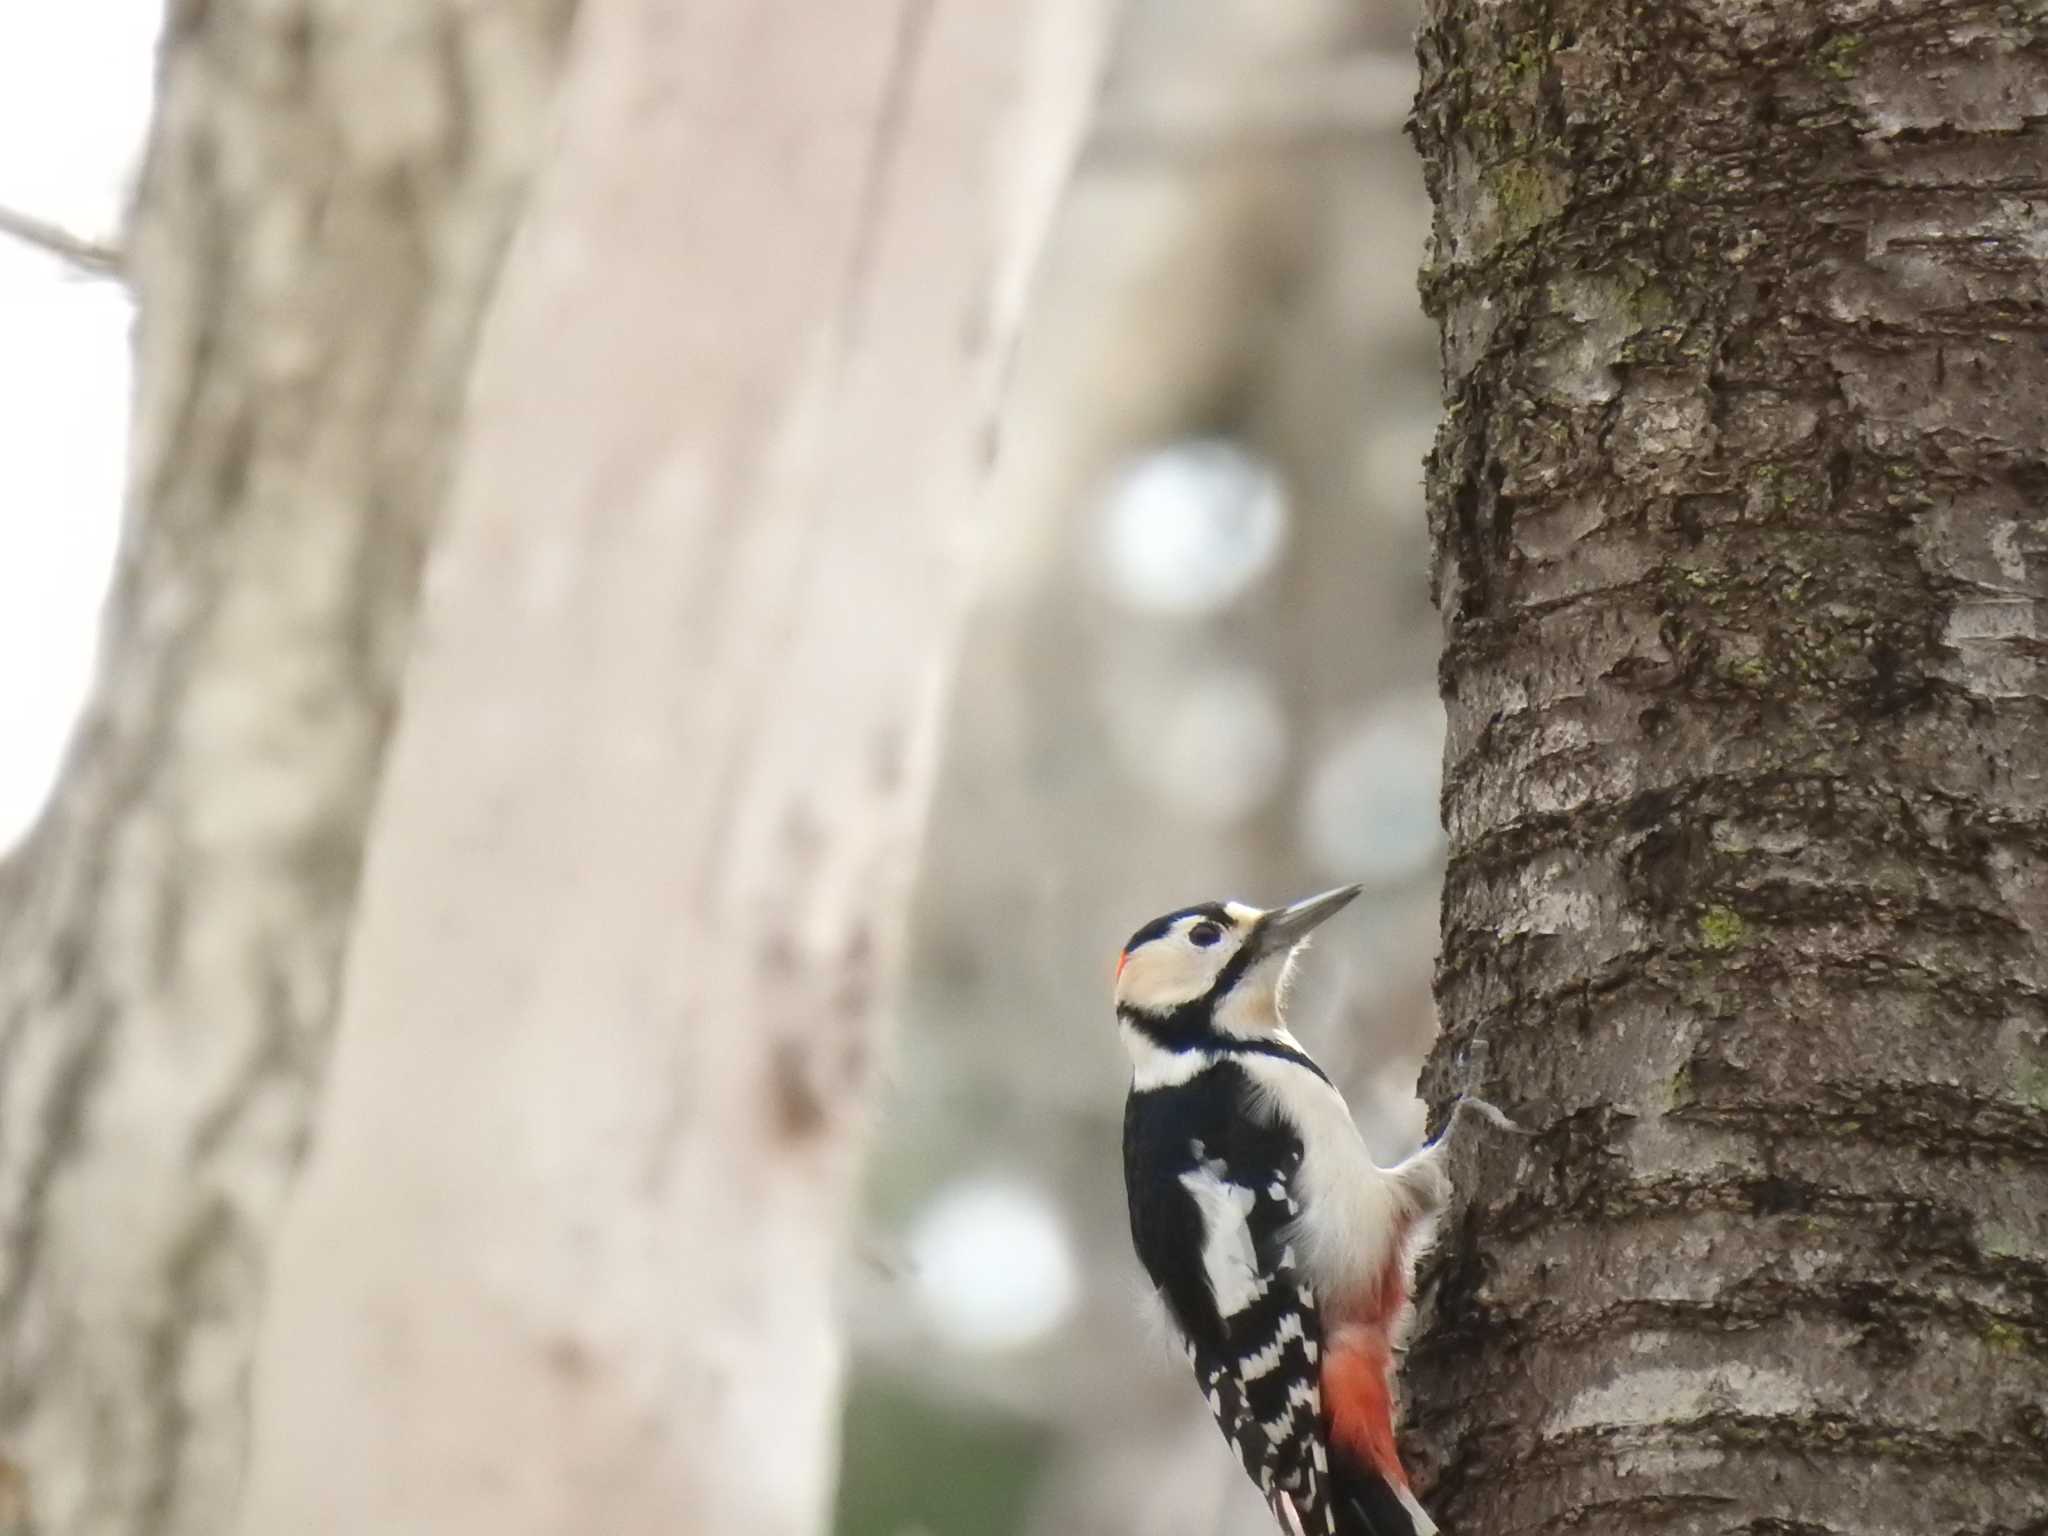 Photo of Great Spotted Woodpecker(japonicus) at 道南四季の杜公園 by ライ